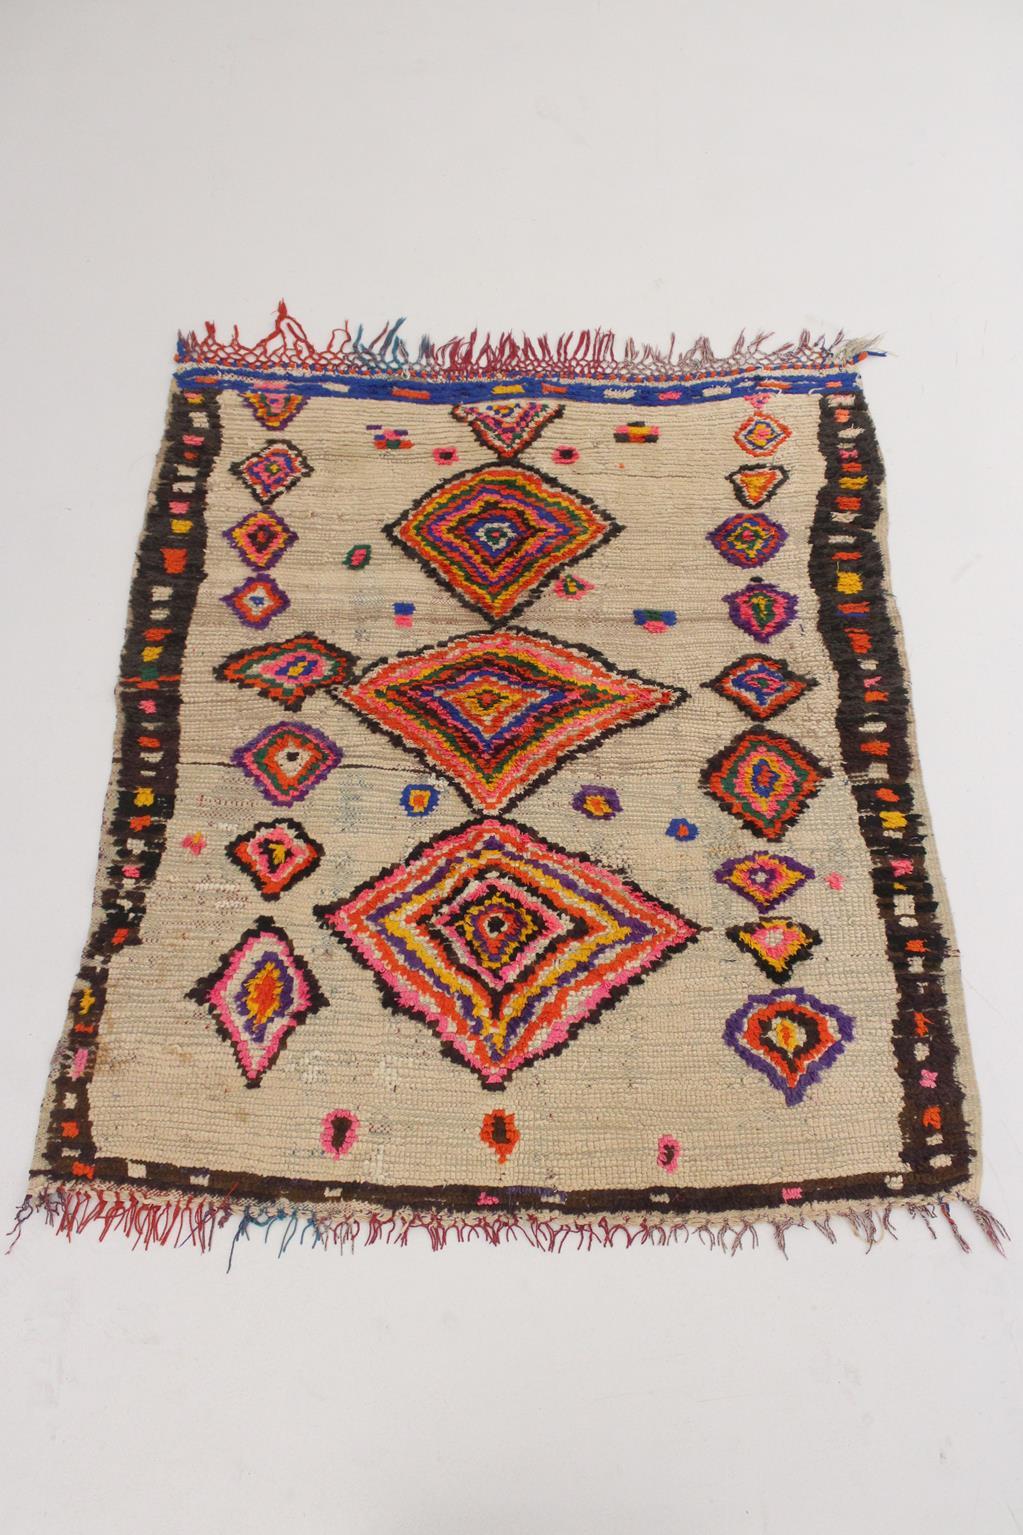 I selected this beautiful rug from piles of carpets as I have always loved a vintage, artful Azilal rug with traditional berber designs! Background of this one is a beige with unregular, colorful diamonds series in pink, red, blue, yellow, orange...